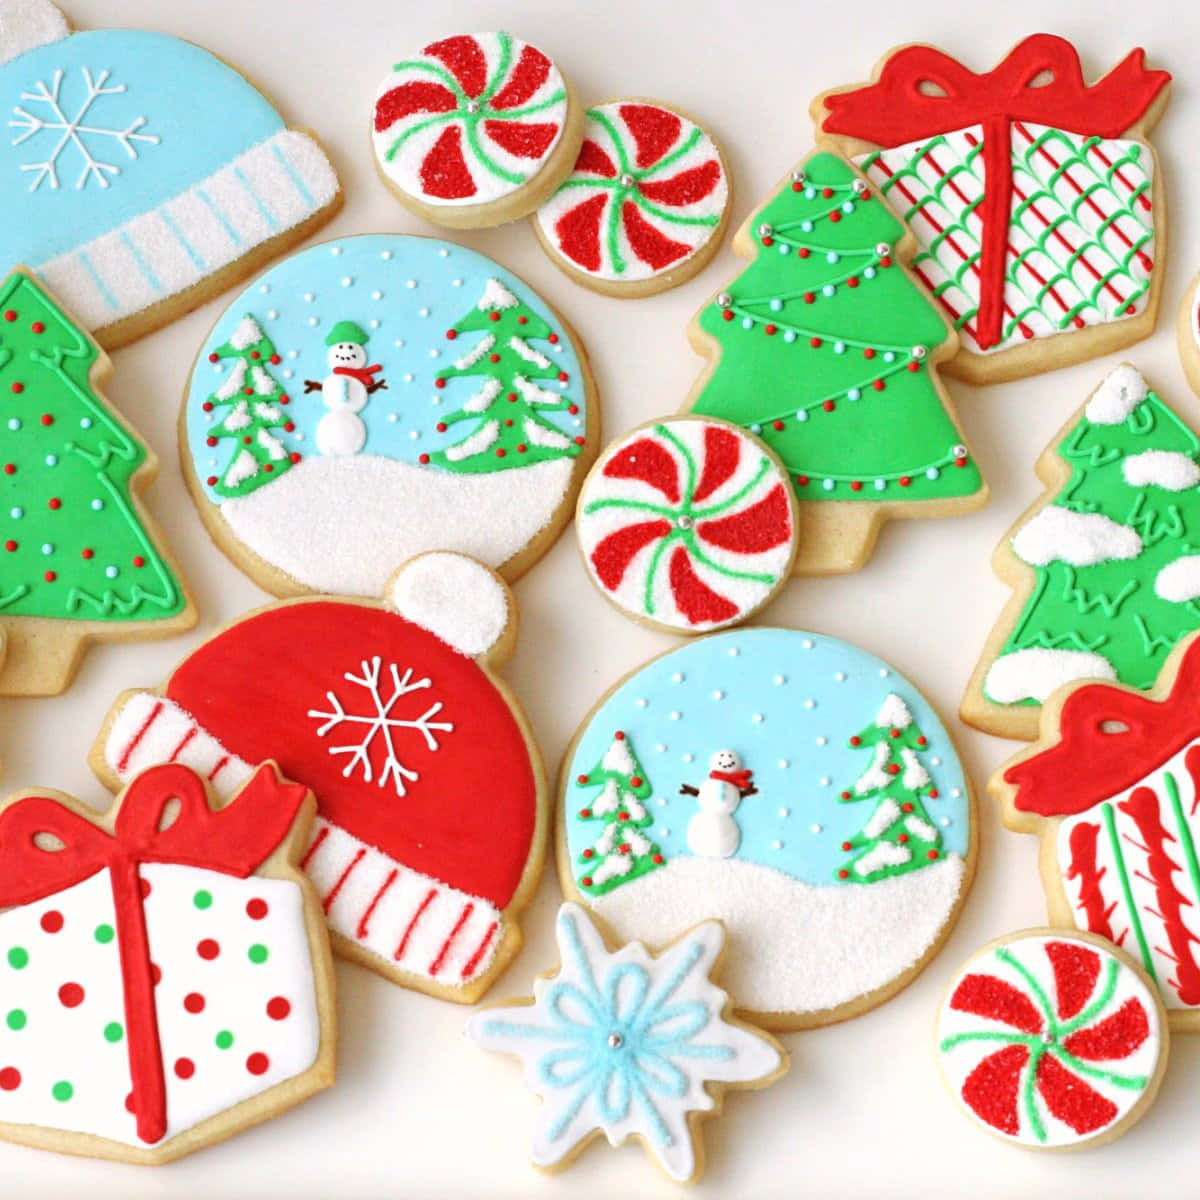 Christmas Cookies Decorated With Christmas Ornaments And Decorations